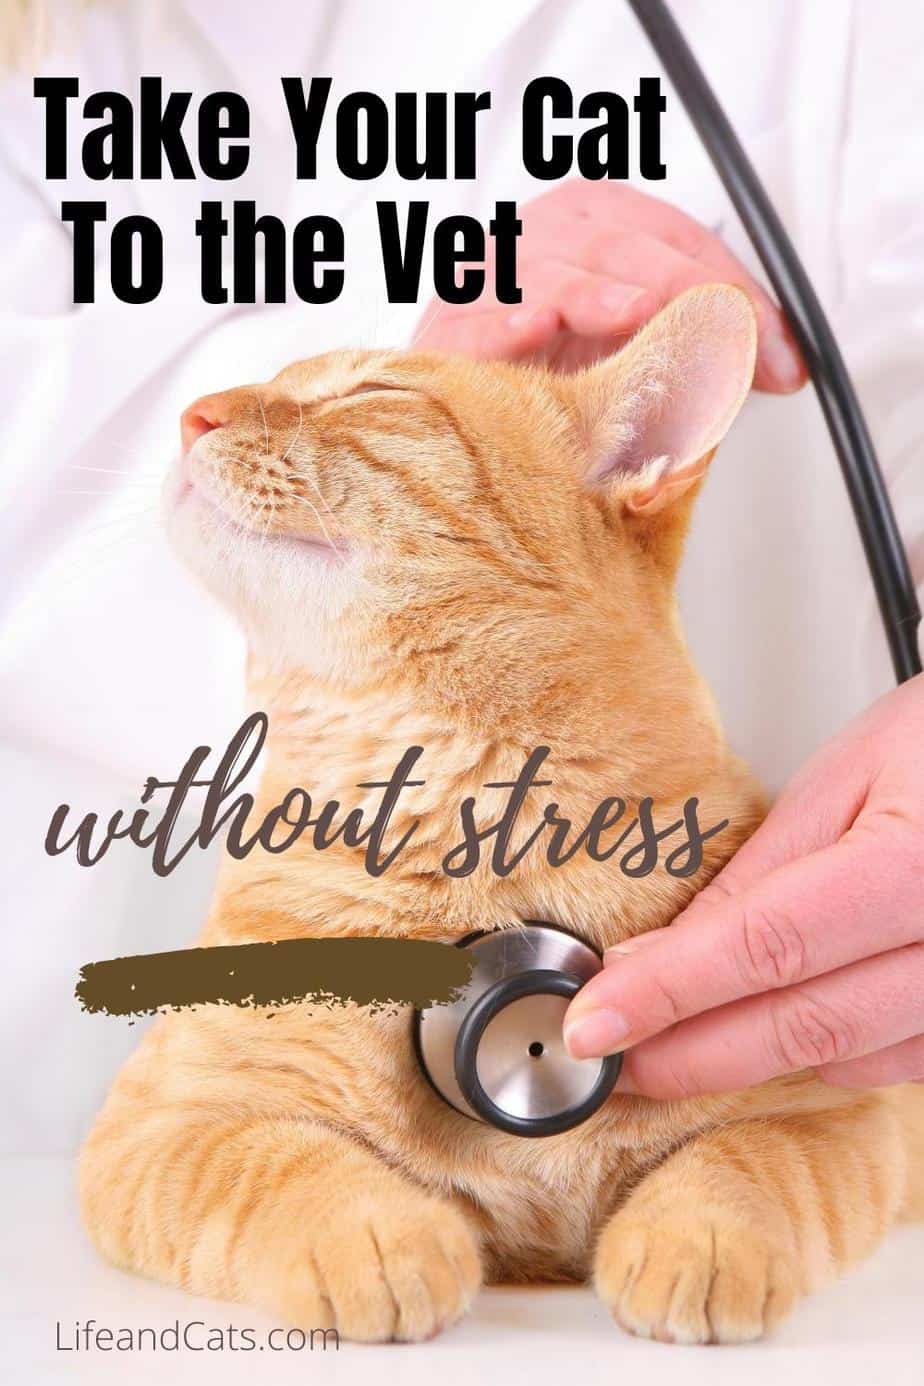 How to Reduce Stress at the Vet